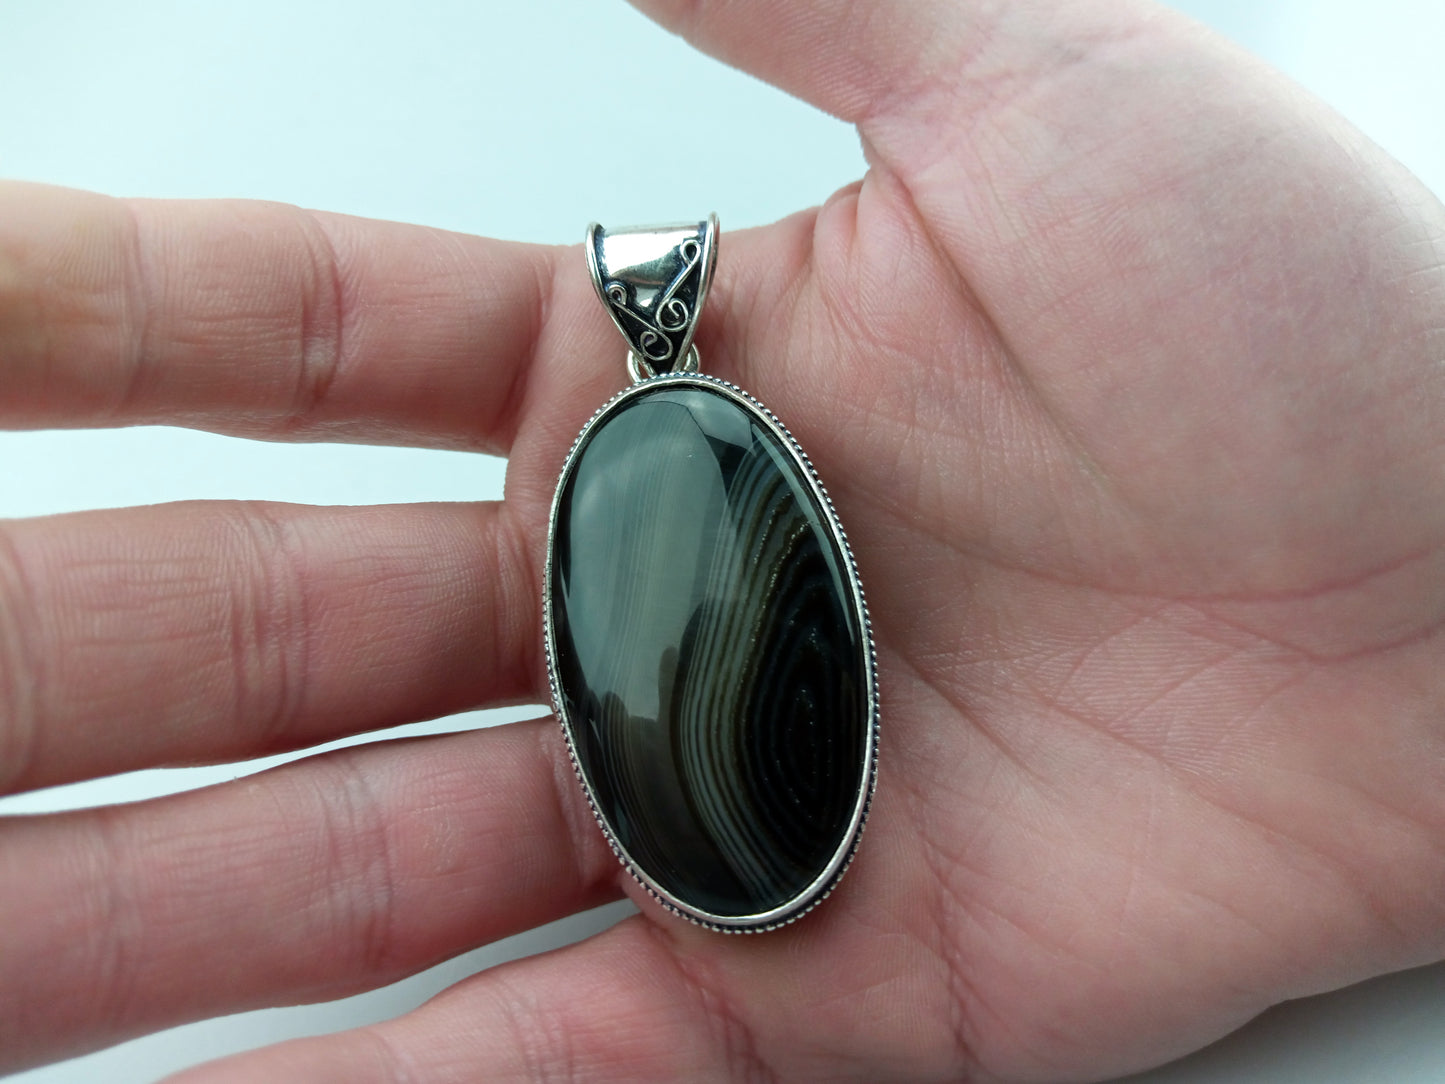 Onyx pendant with white agate